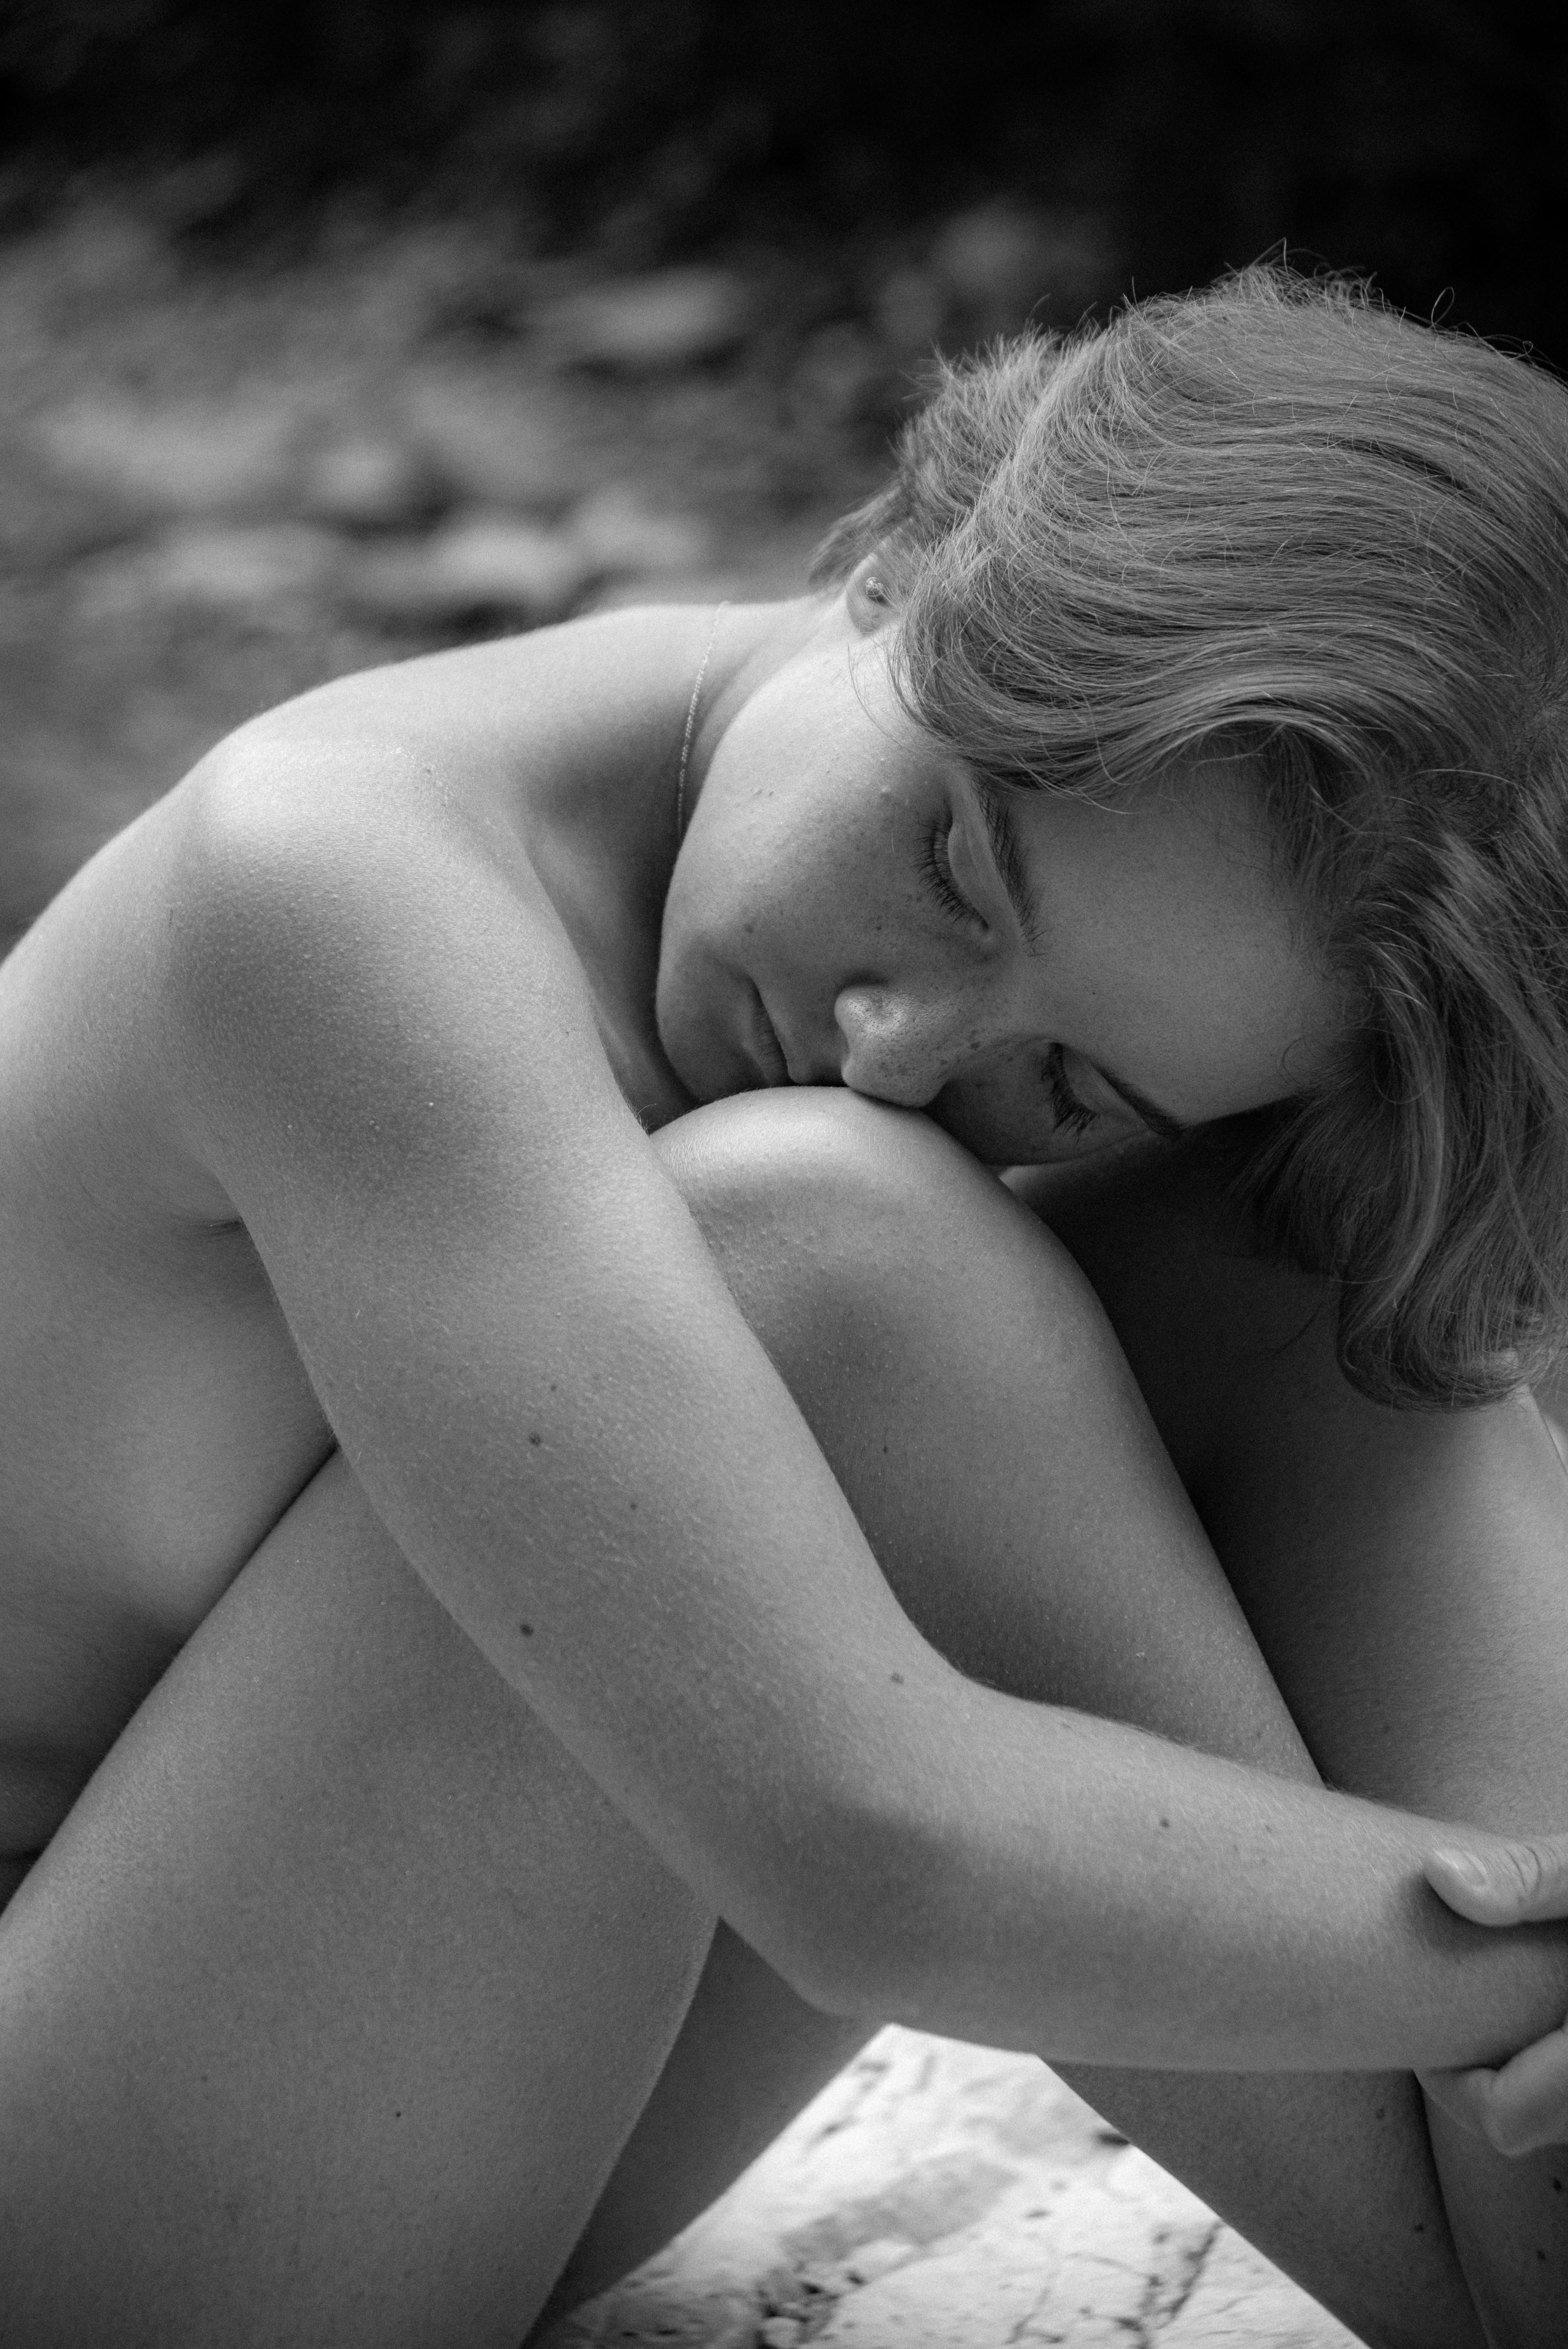 grayscale photo of a naked woman